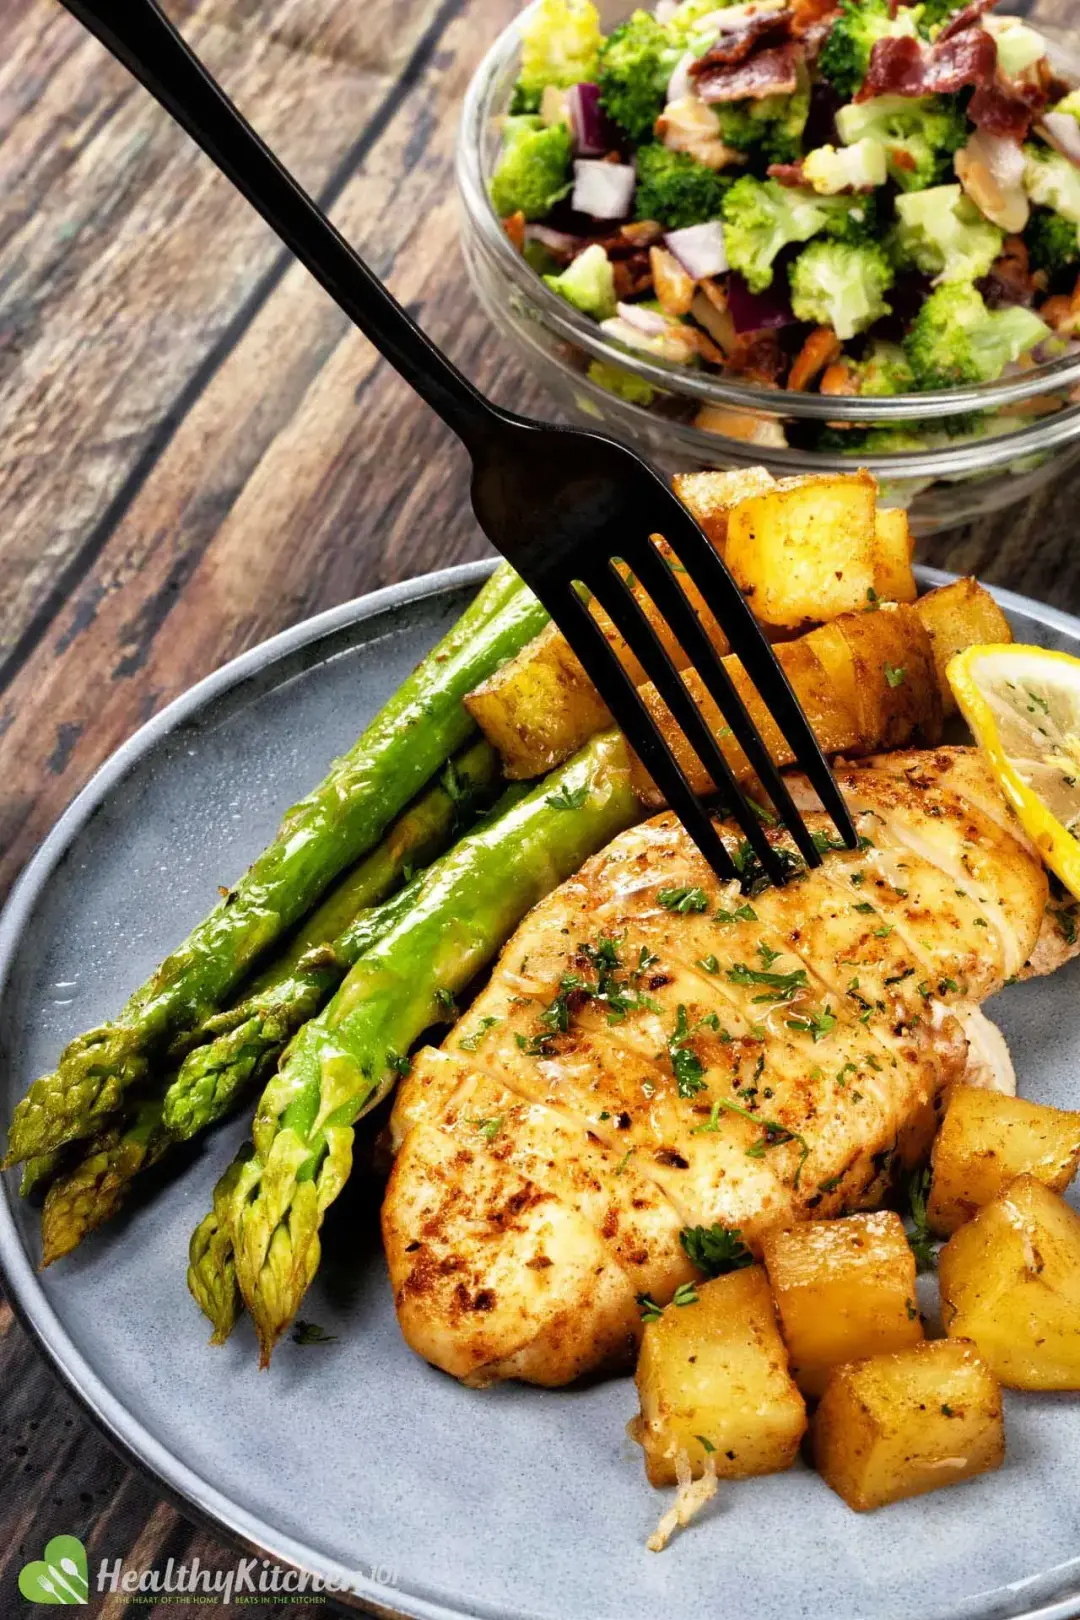 A black fork stuck into a piece of baked chicken breast surrounded by asparagus stalks and potato cubes